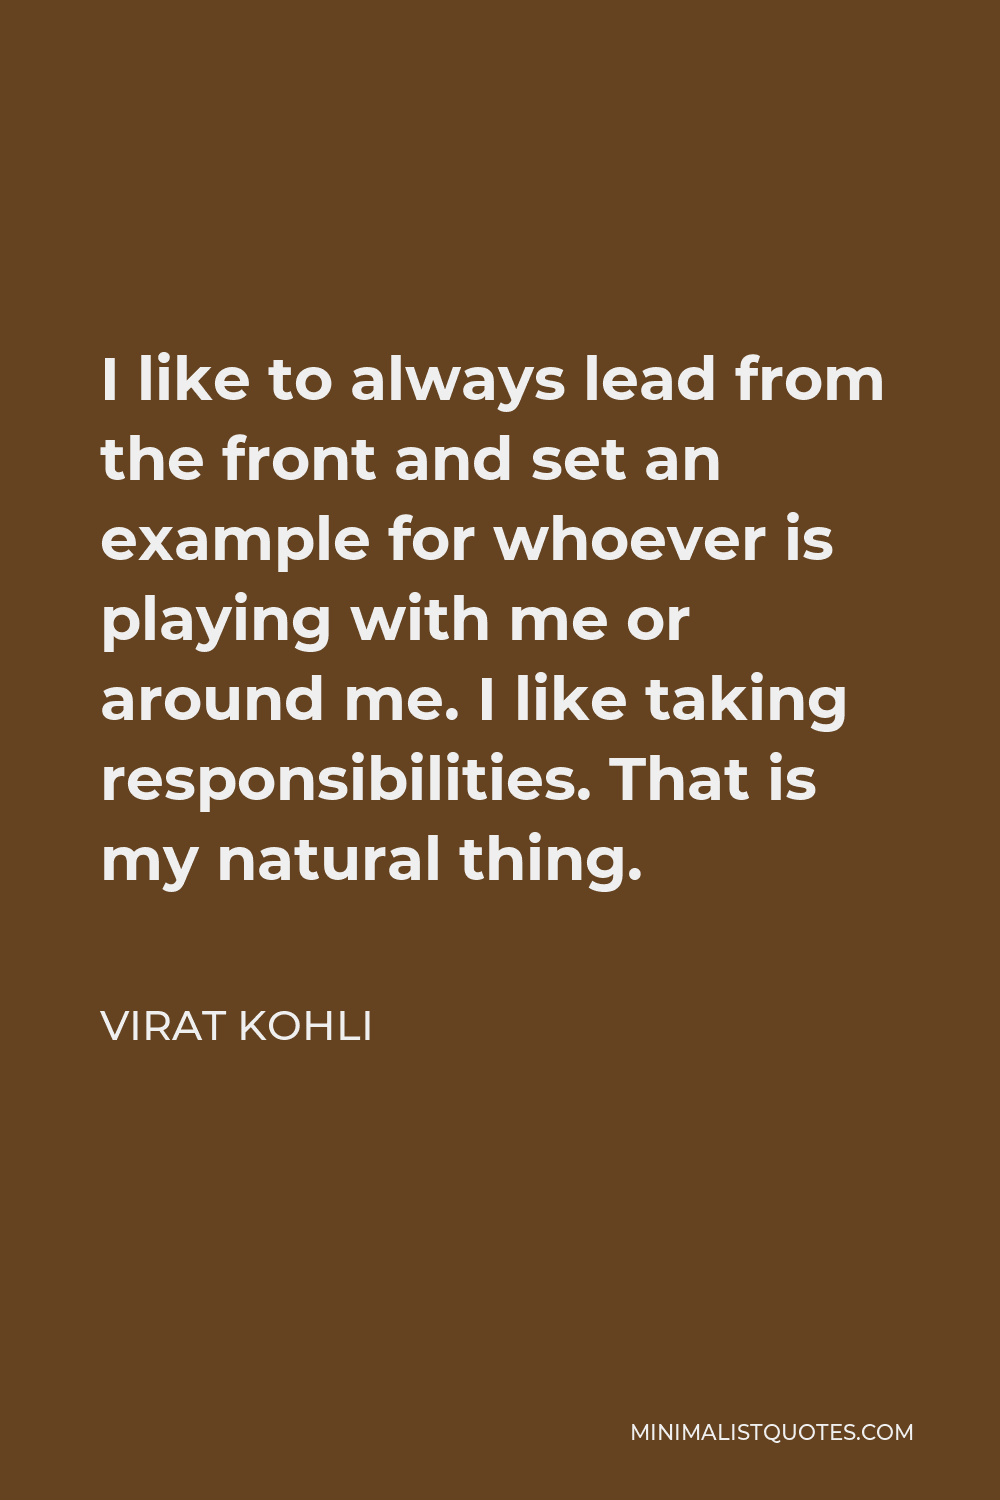 Virat Kohli Quote - I like to always lead from the front and set an example for whoever is playing with me or around me. I like taking responsibilities. That is my natural thing.